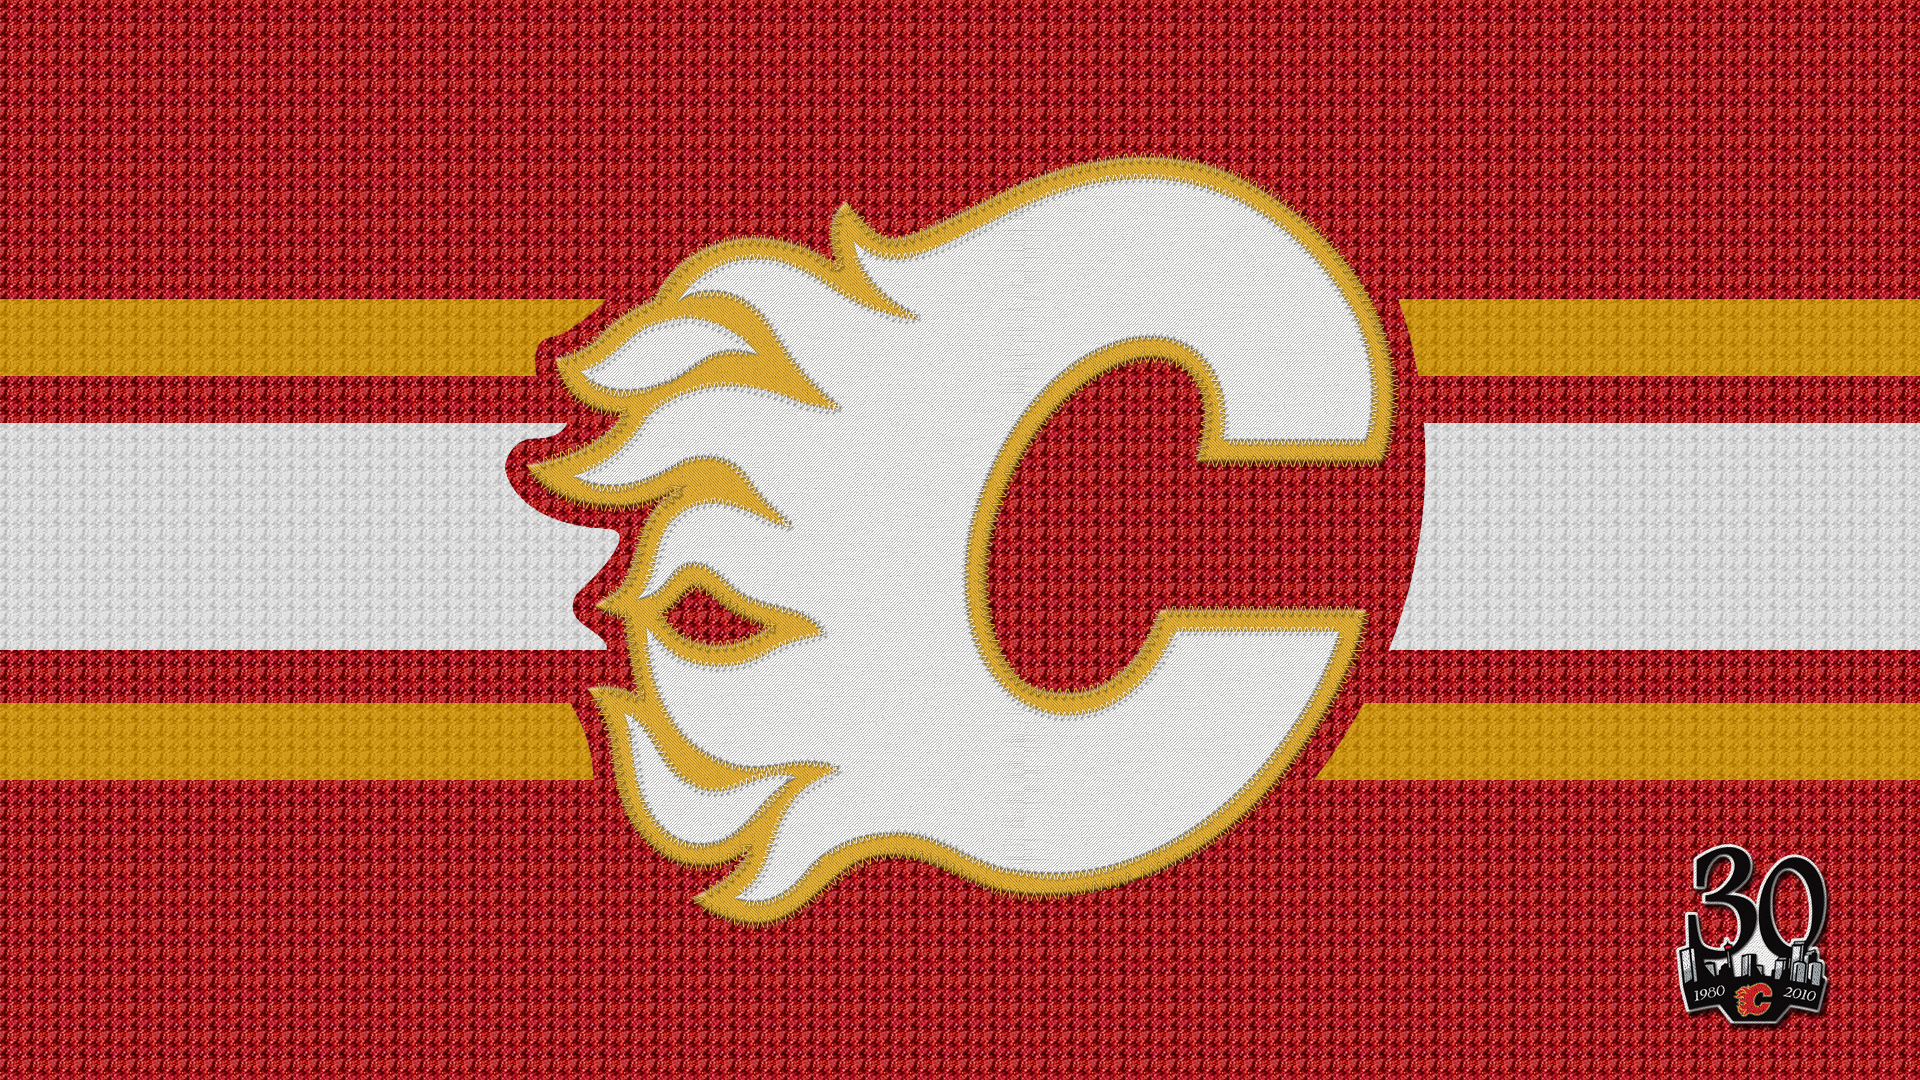 Calgary Flames 30th Jersey by Bruins4Life on